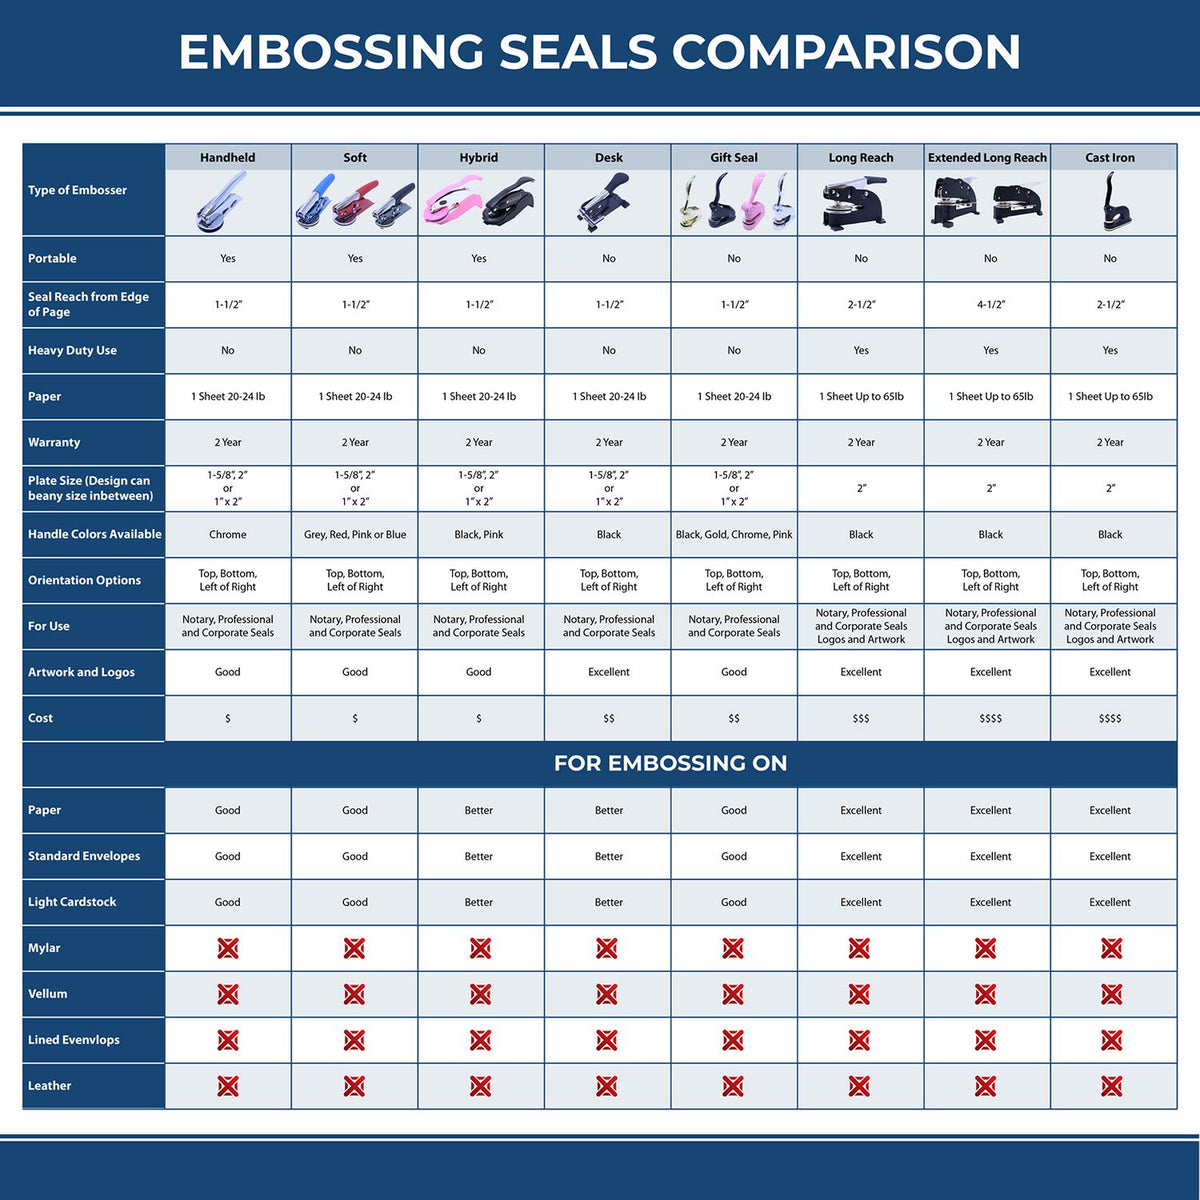 A comparison chart for the different types of mount models available for the Heavy Duty Cast Iron Montana Engineer Seal Embosser.